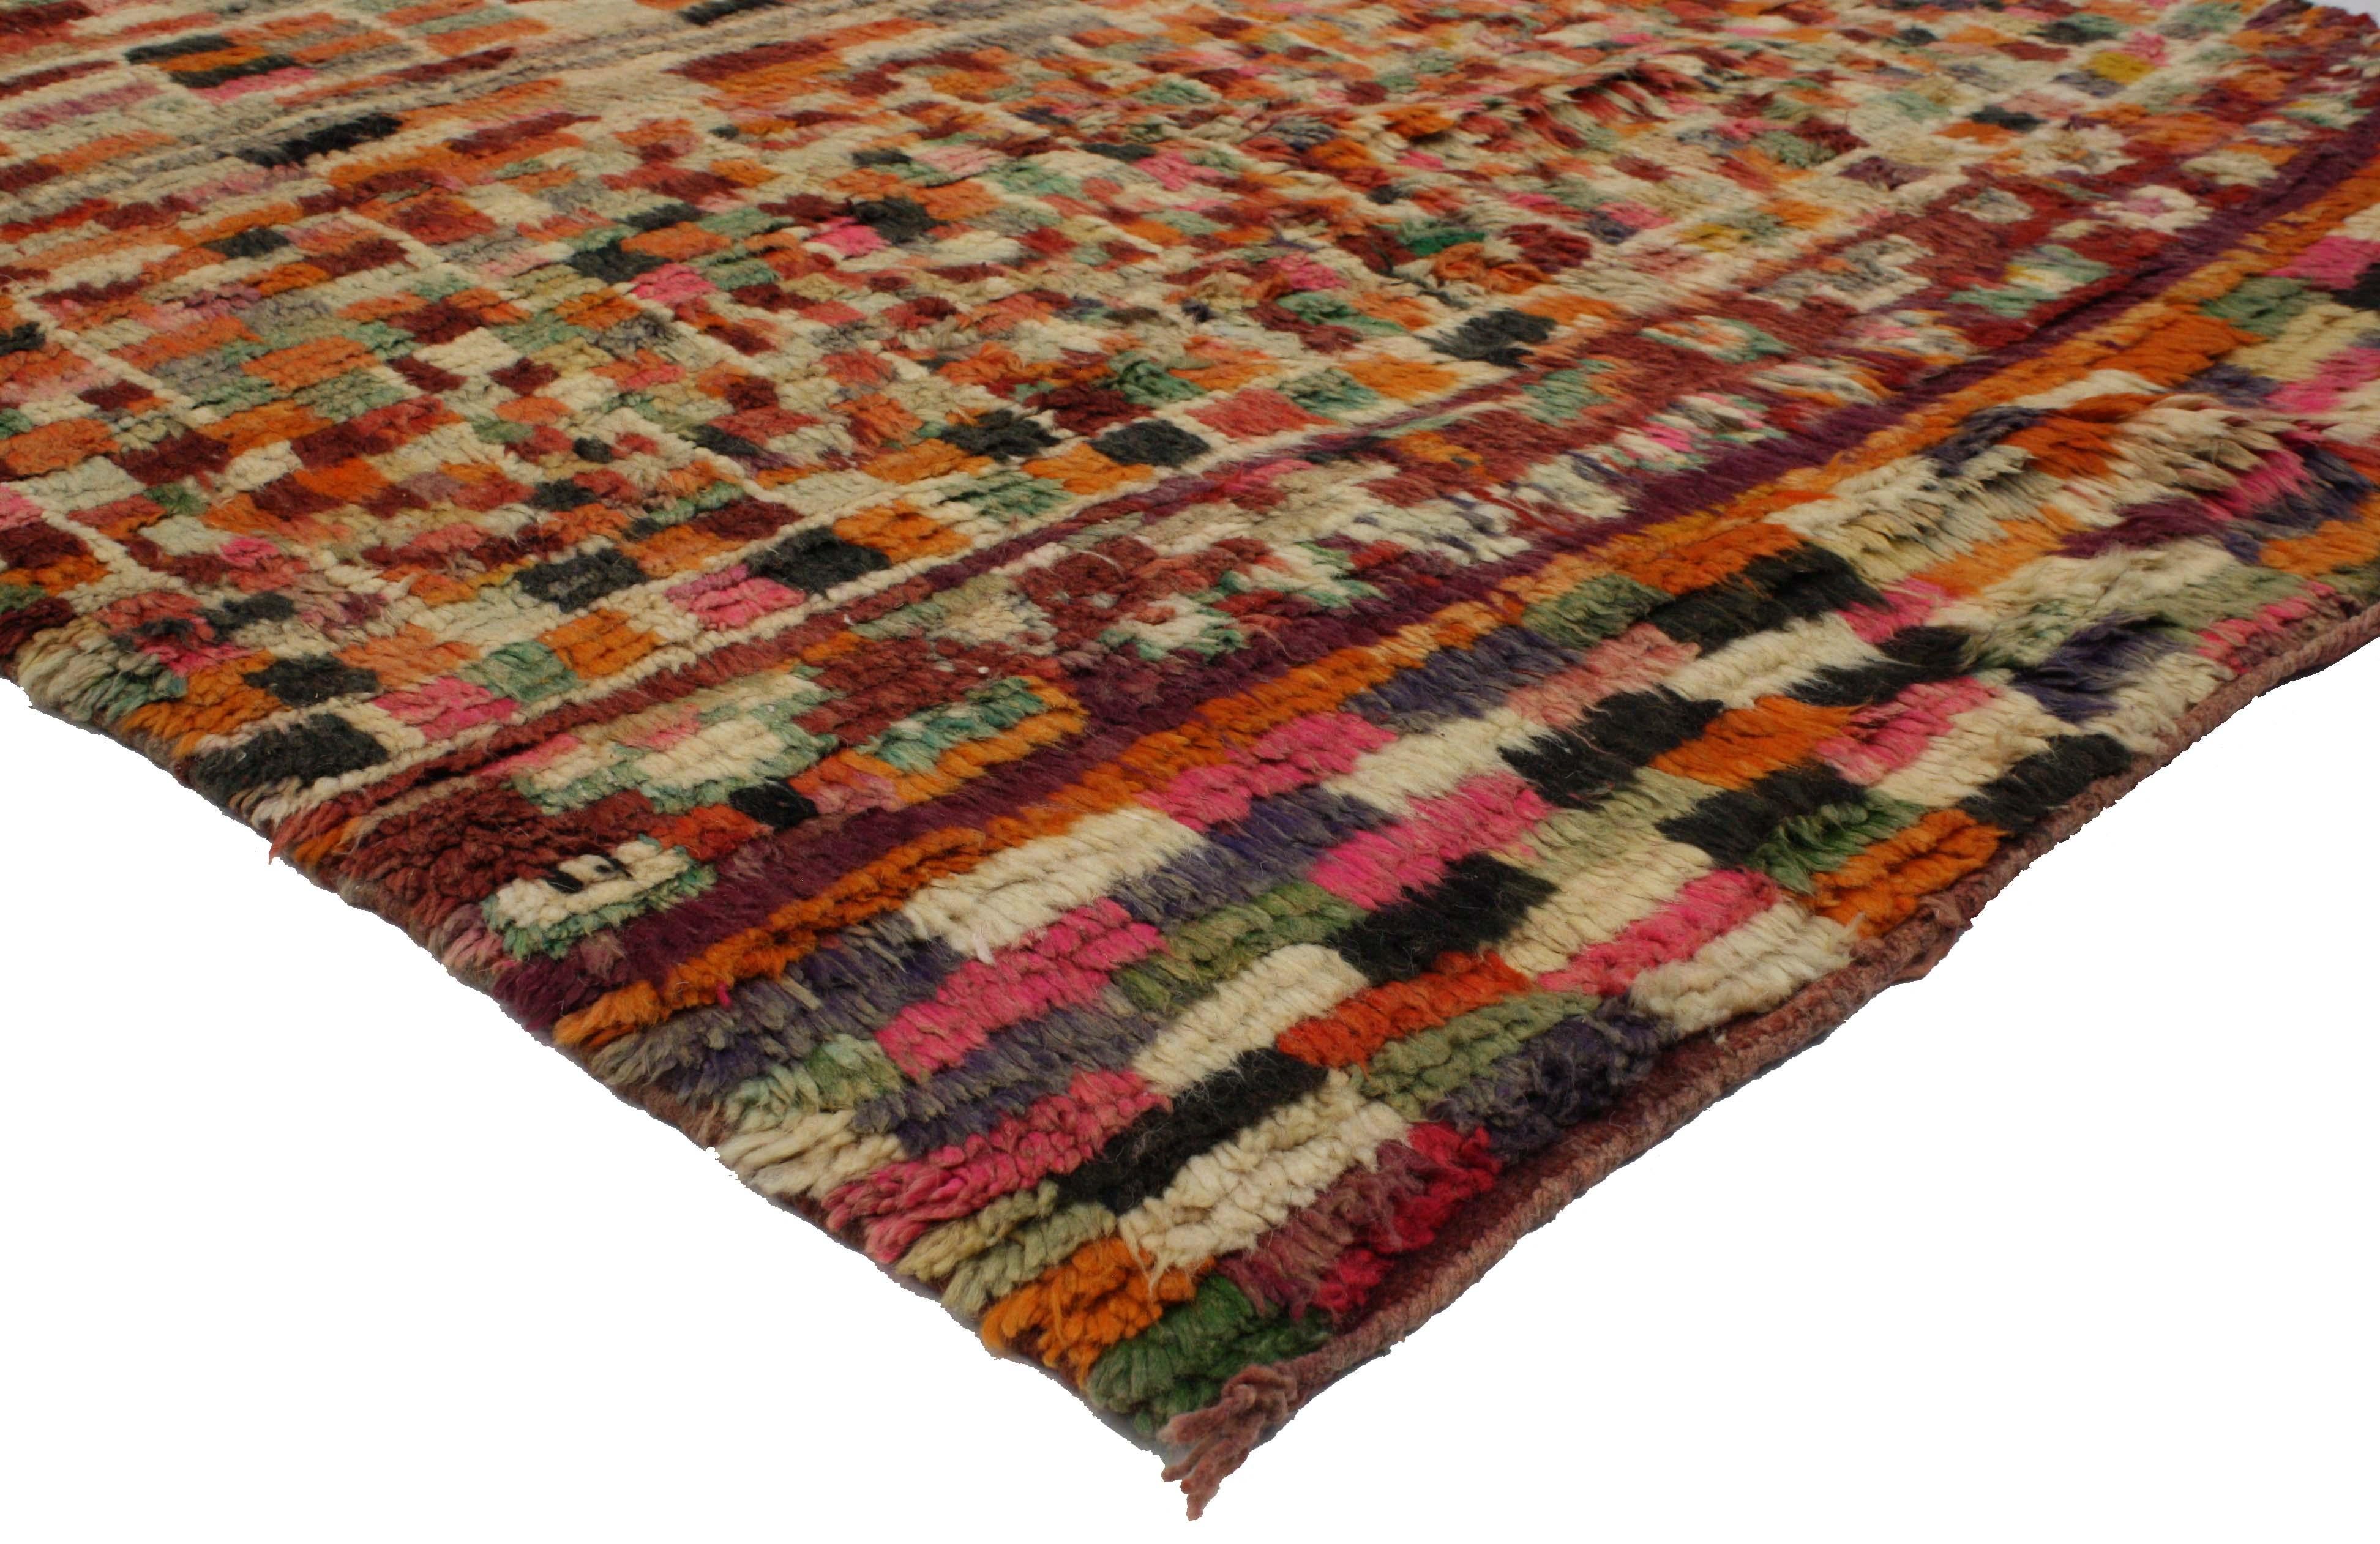 20th Century Vintage Berber Moroccan Rehamna Rug with Post-Modern, Bauhaus Cubism Style